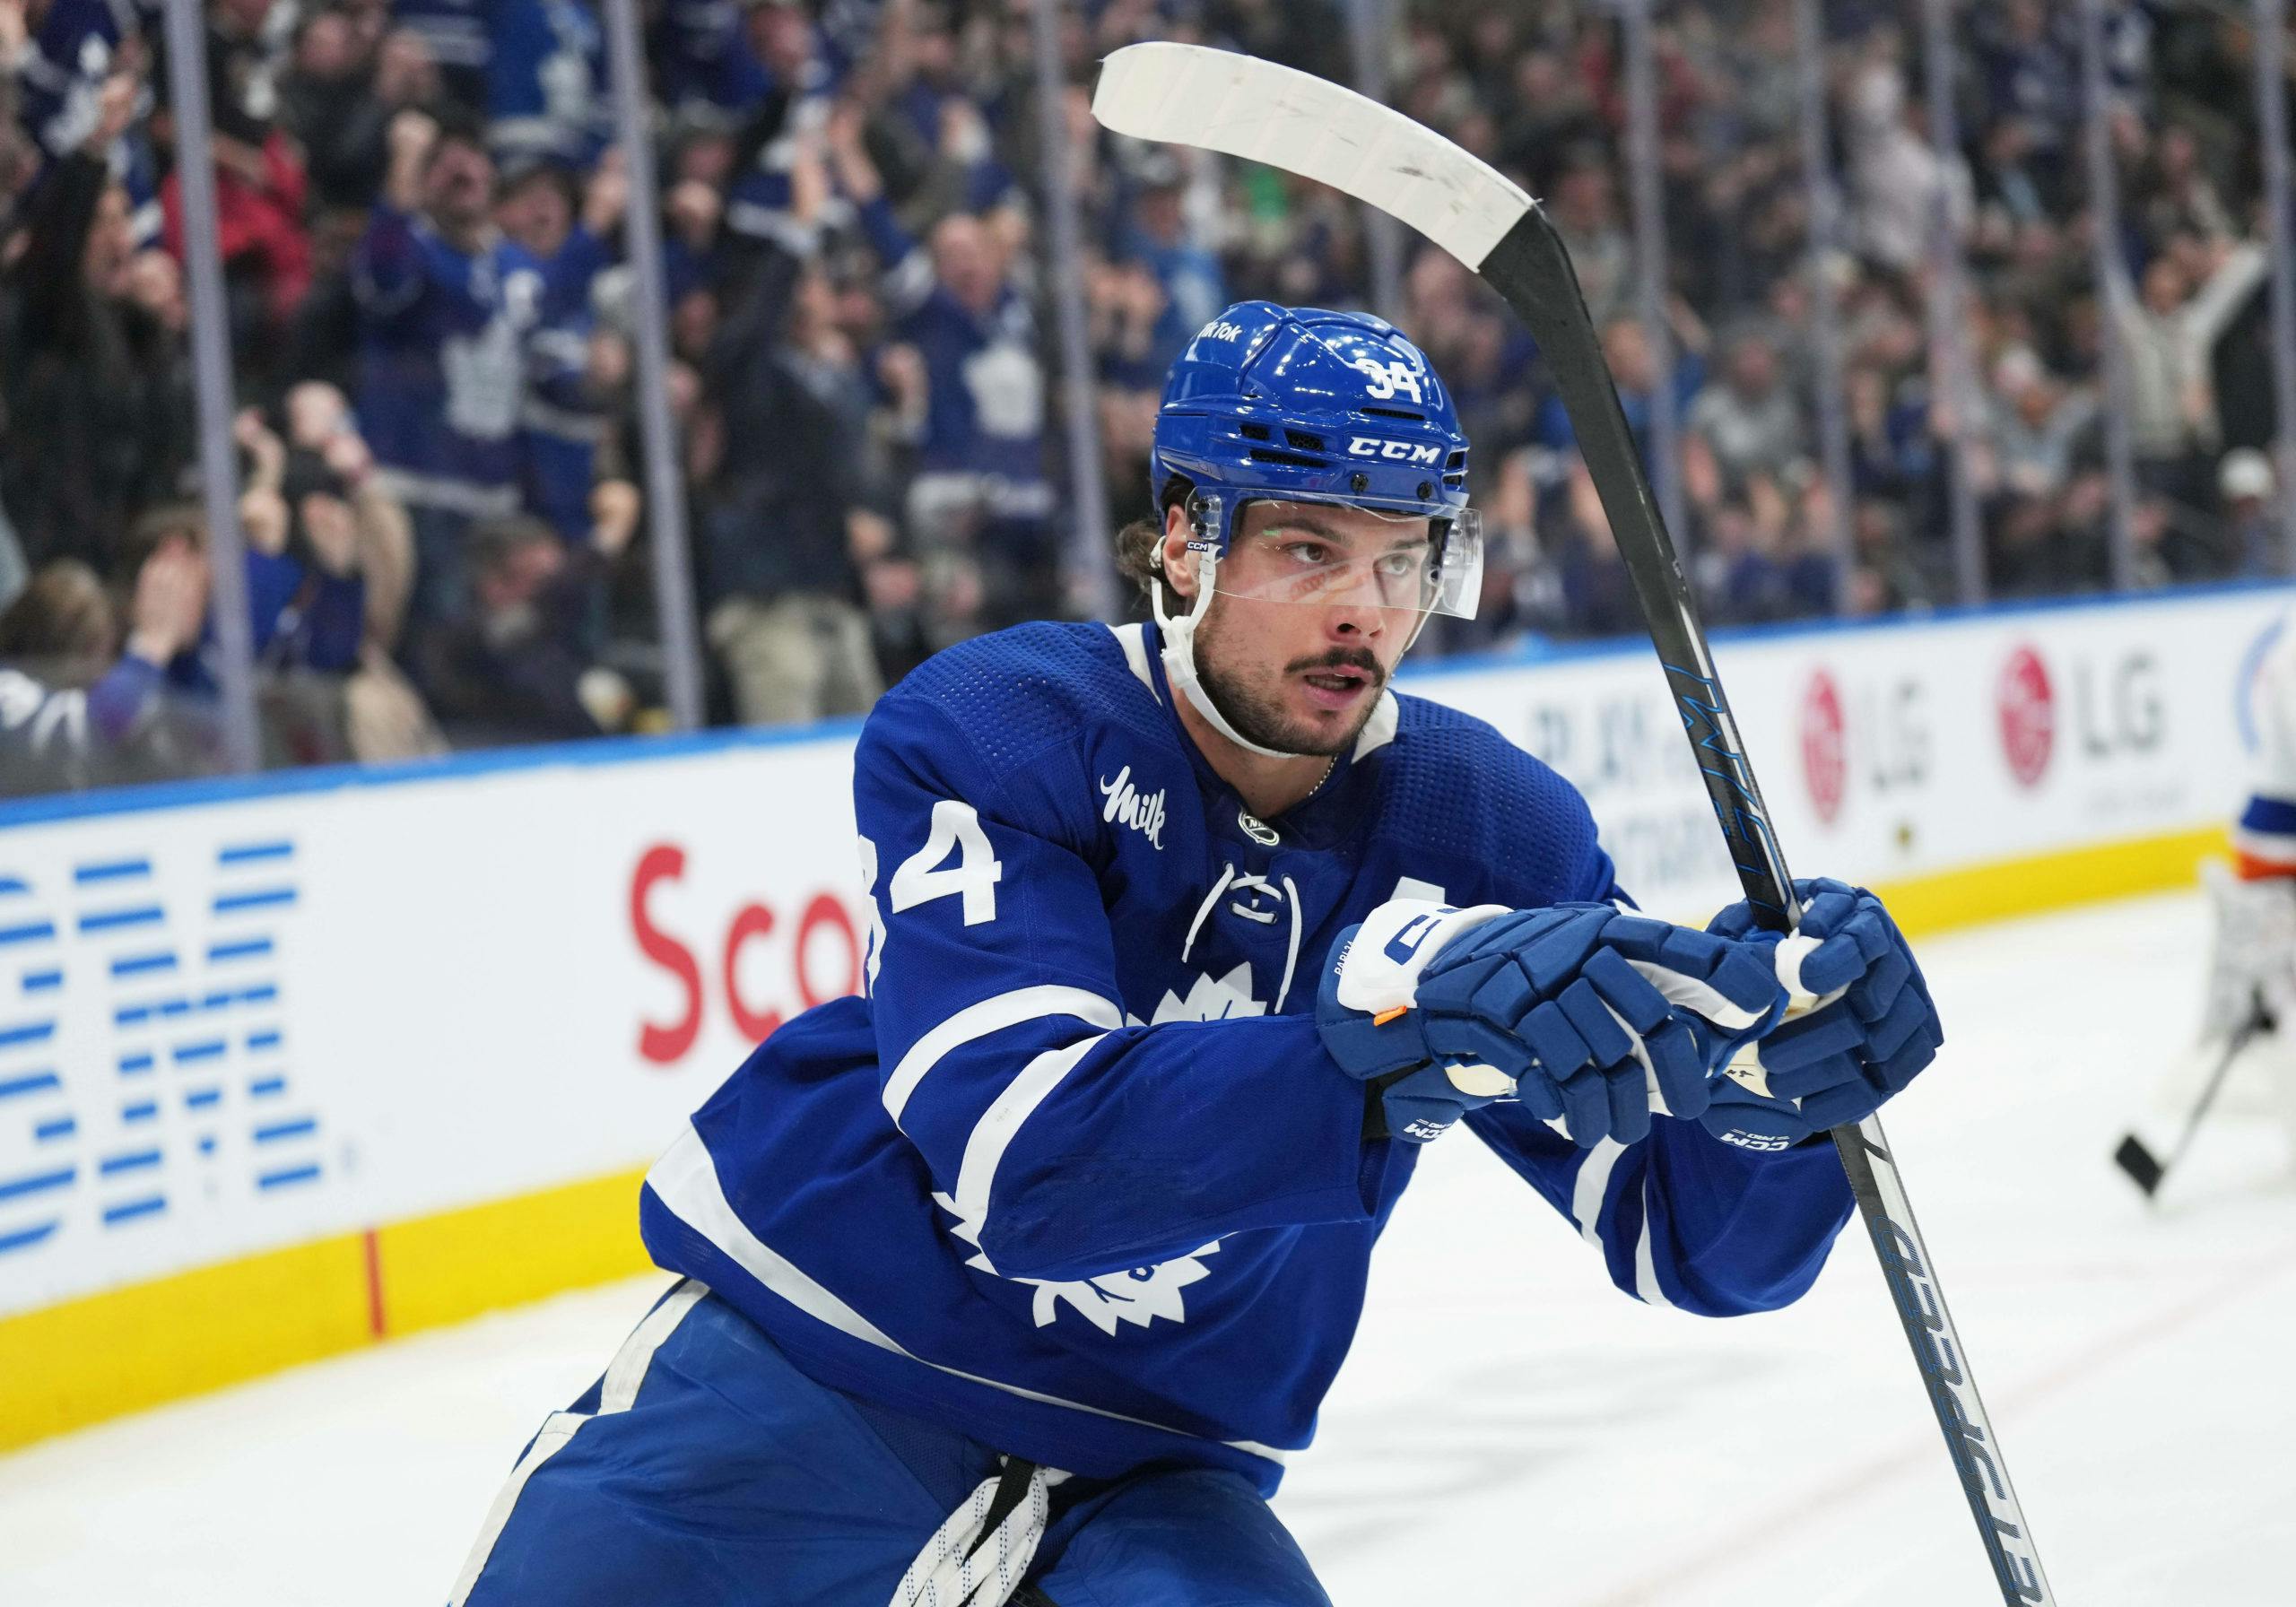 Insider's game day: Toronto Maple Leafs